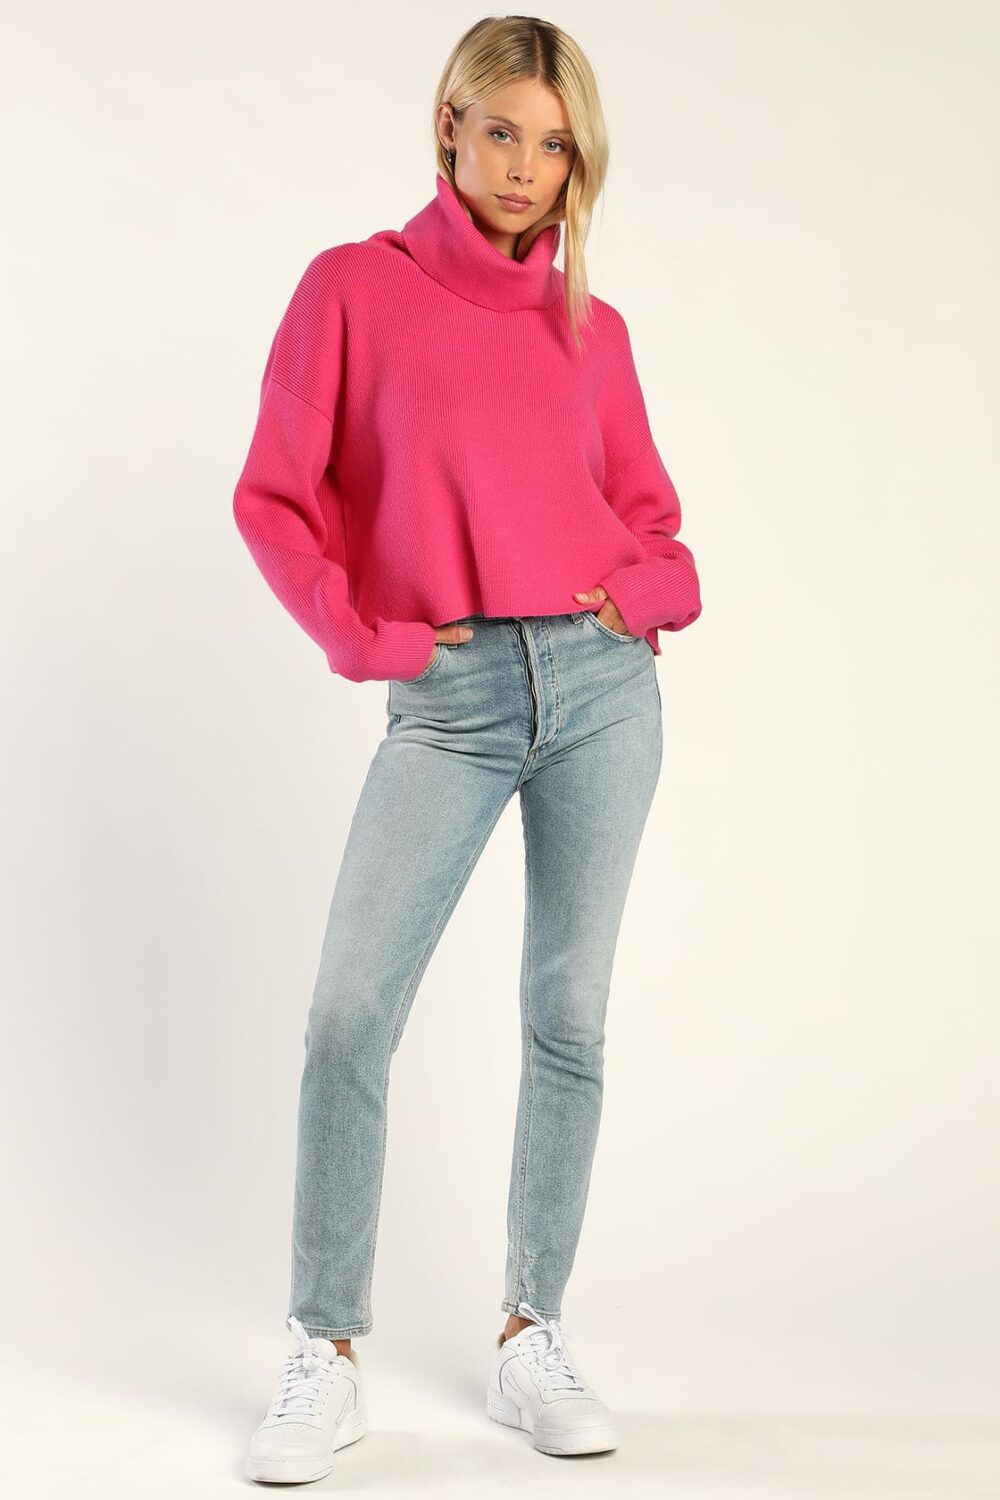 When you have the Lets Cuddle Hot Pink Cowl Neck Sweater in your wardrobe cold days arent so unpleasant. High rise jeans and a cup of anything pumpkin spiced are all you need right now